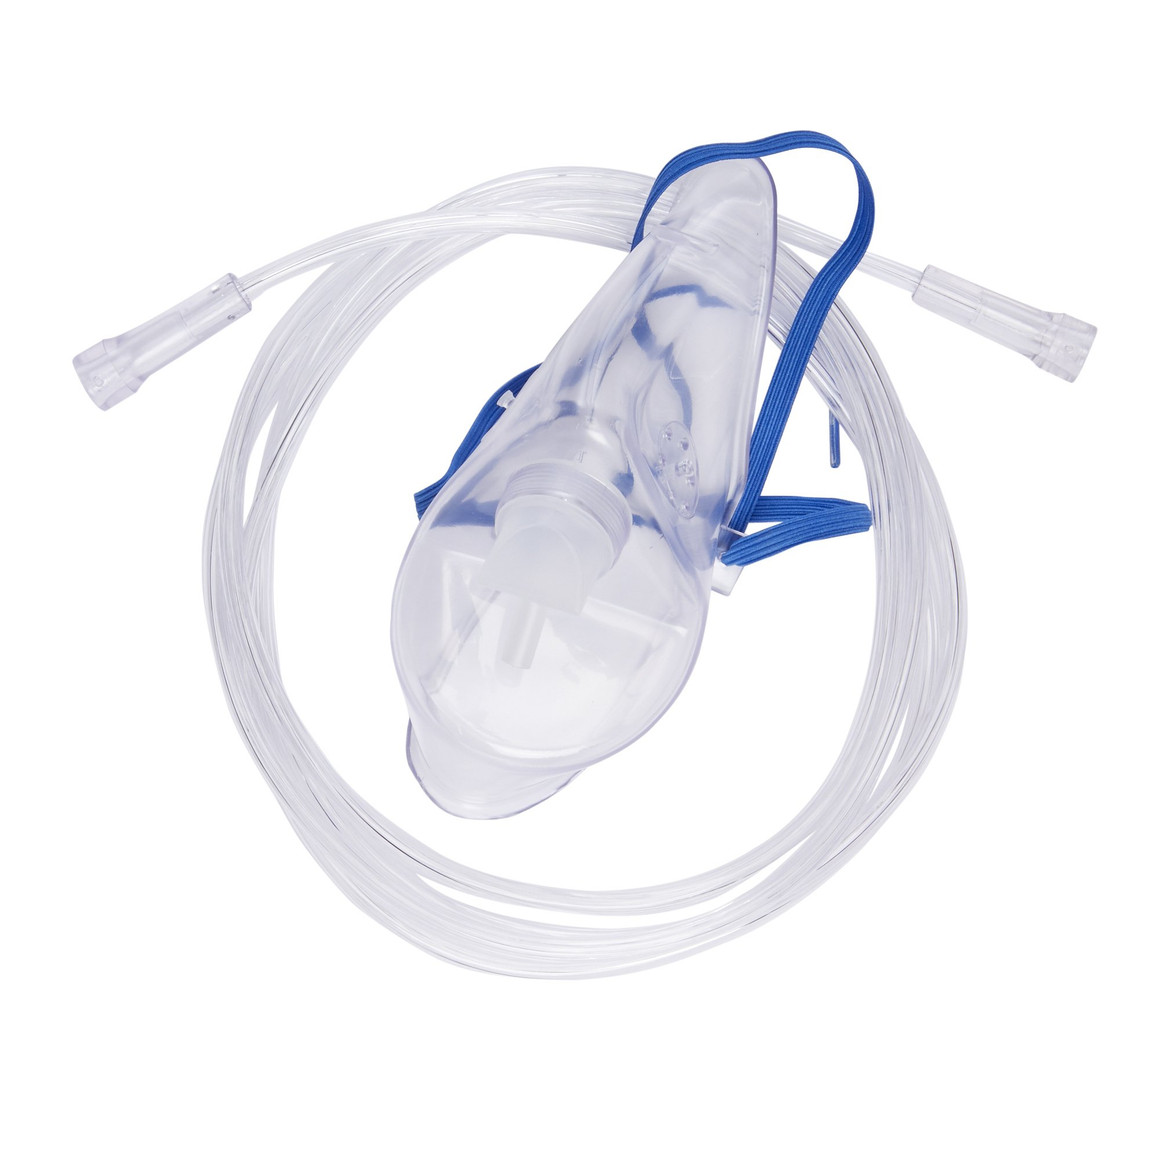 McKesson  Oxygen Mask Elongated Style Adult One Size Fits Most Adjustable Head Strap